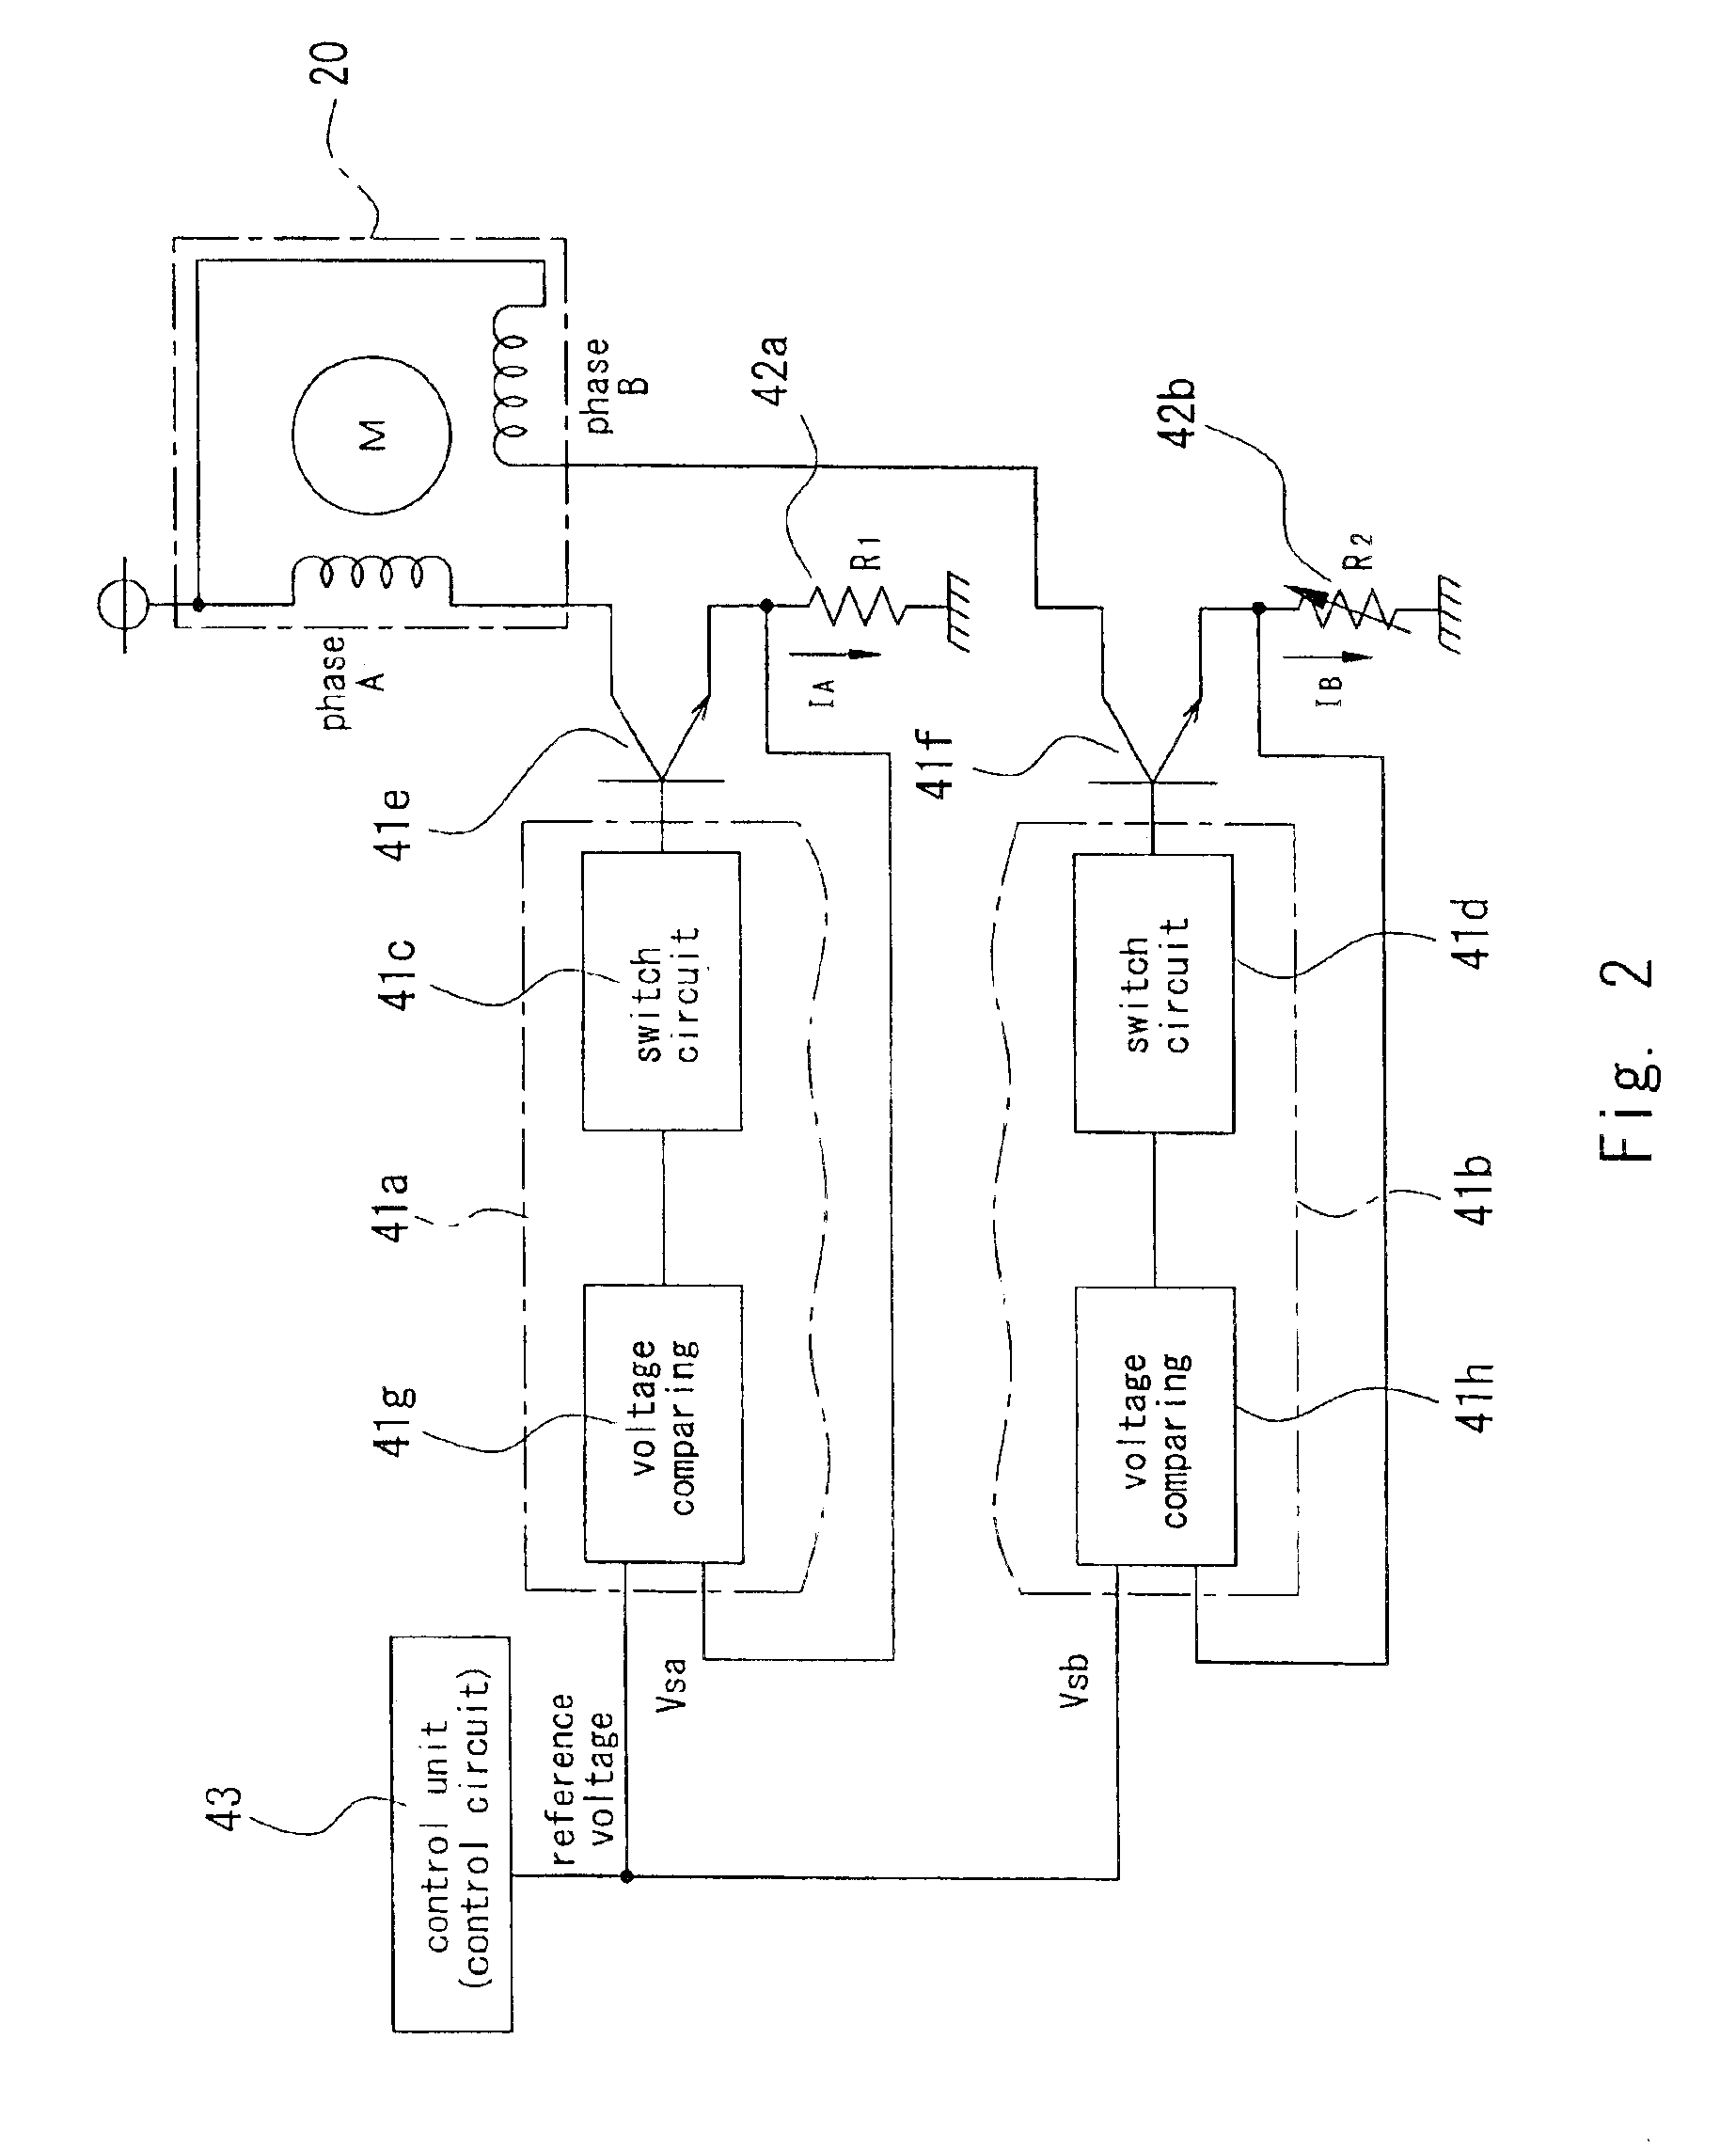 Method and device for pacing an image reader at a constant scanning speed